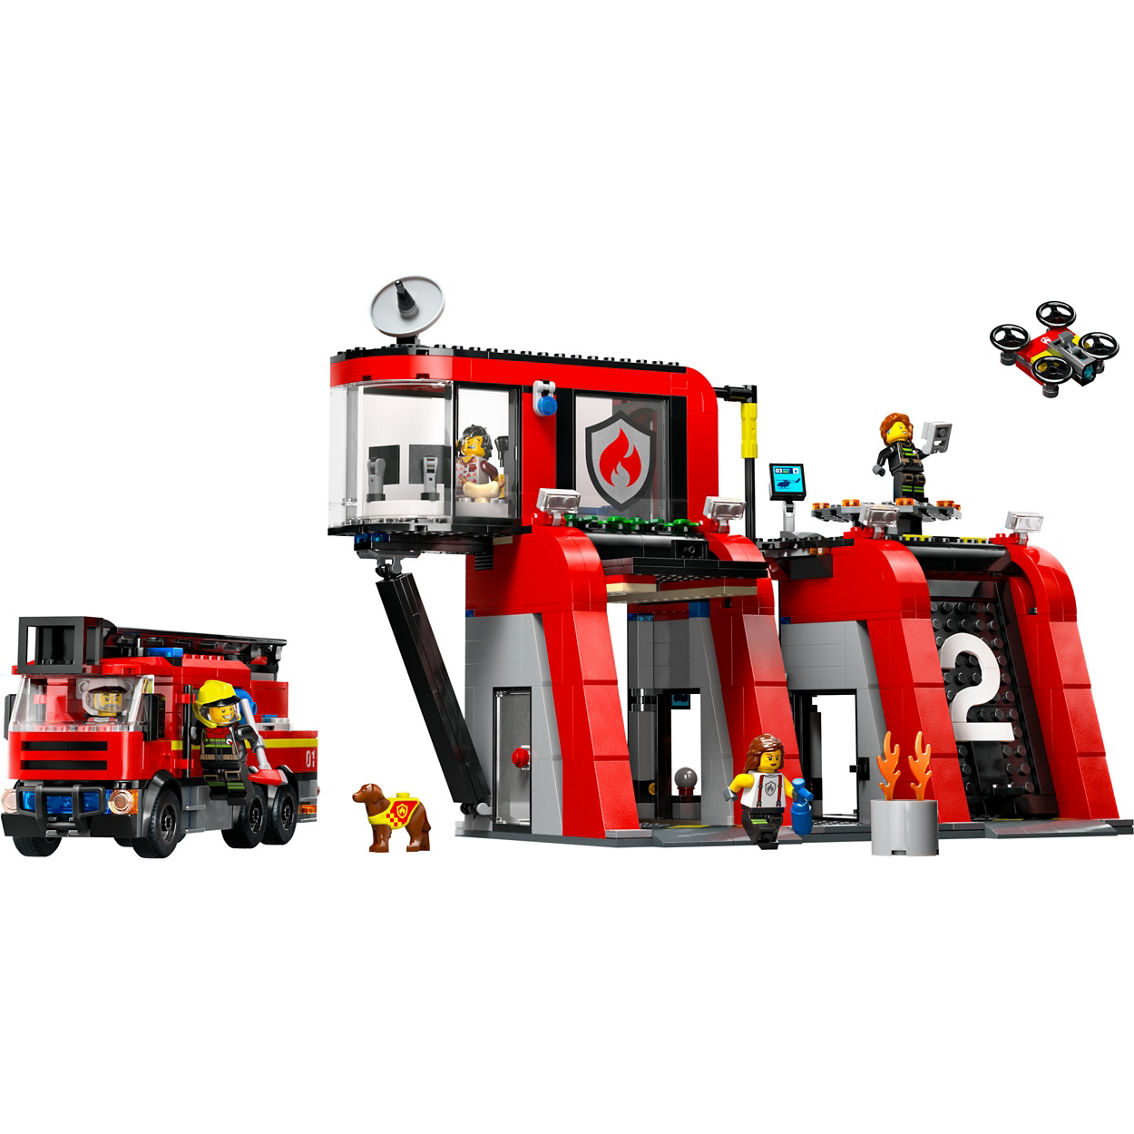 LEGO City Fire Station with Fire Truck 60414 - Image 2 of 7